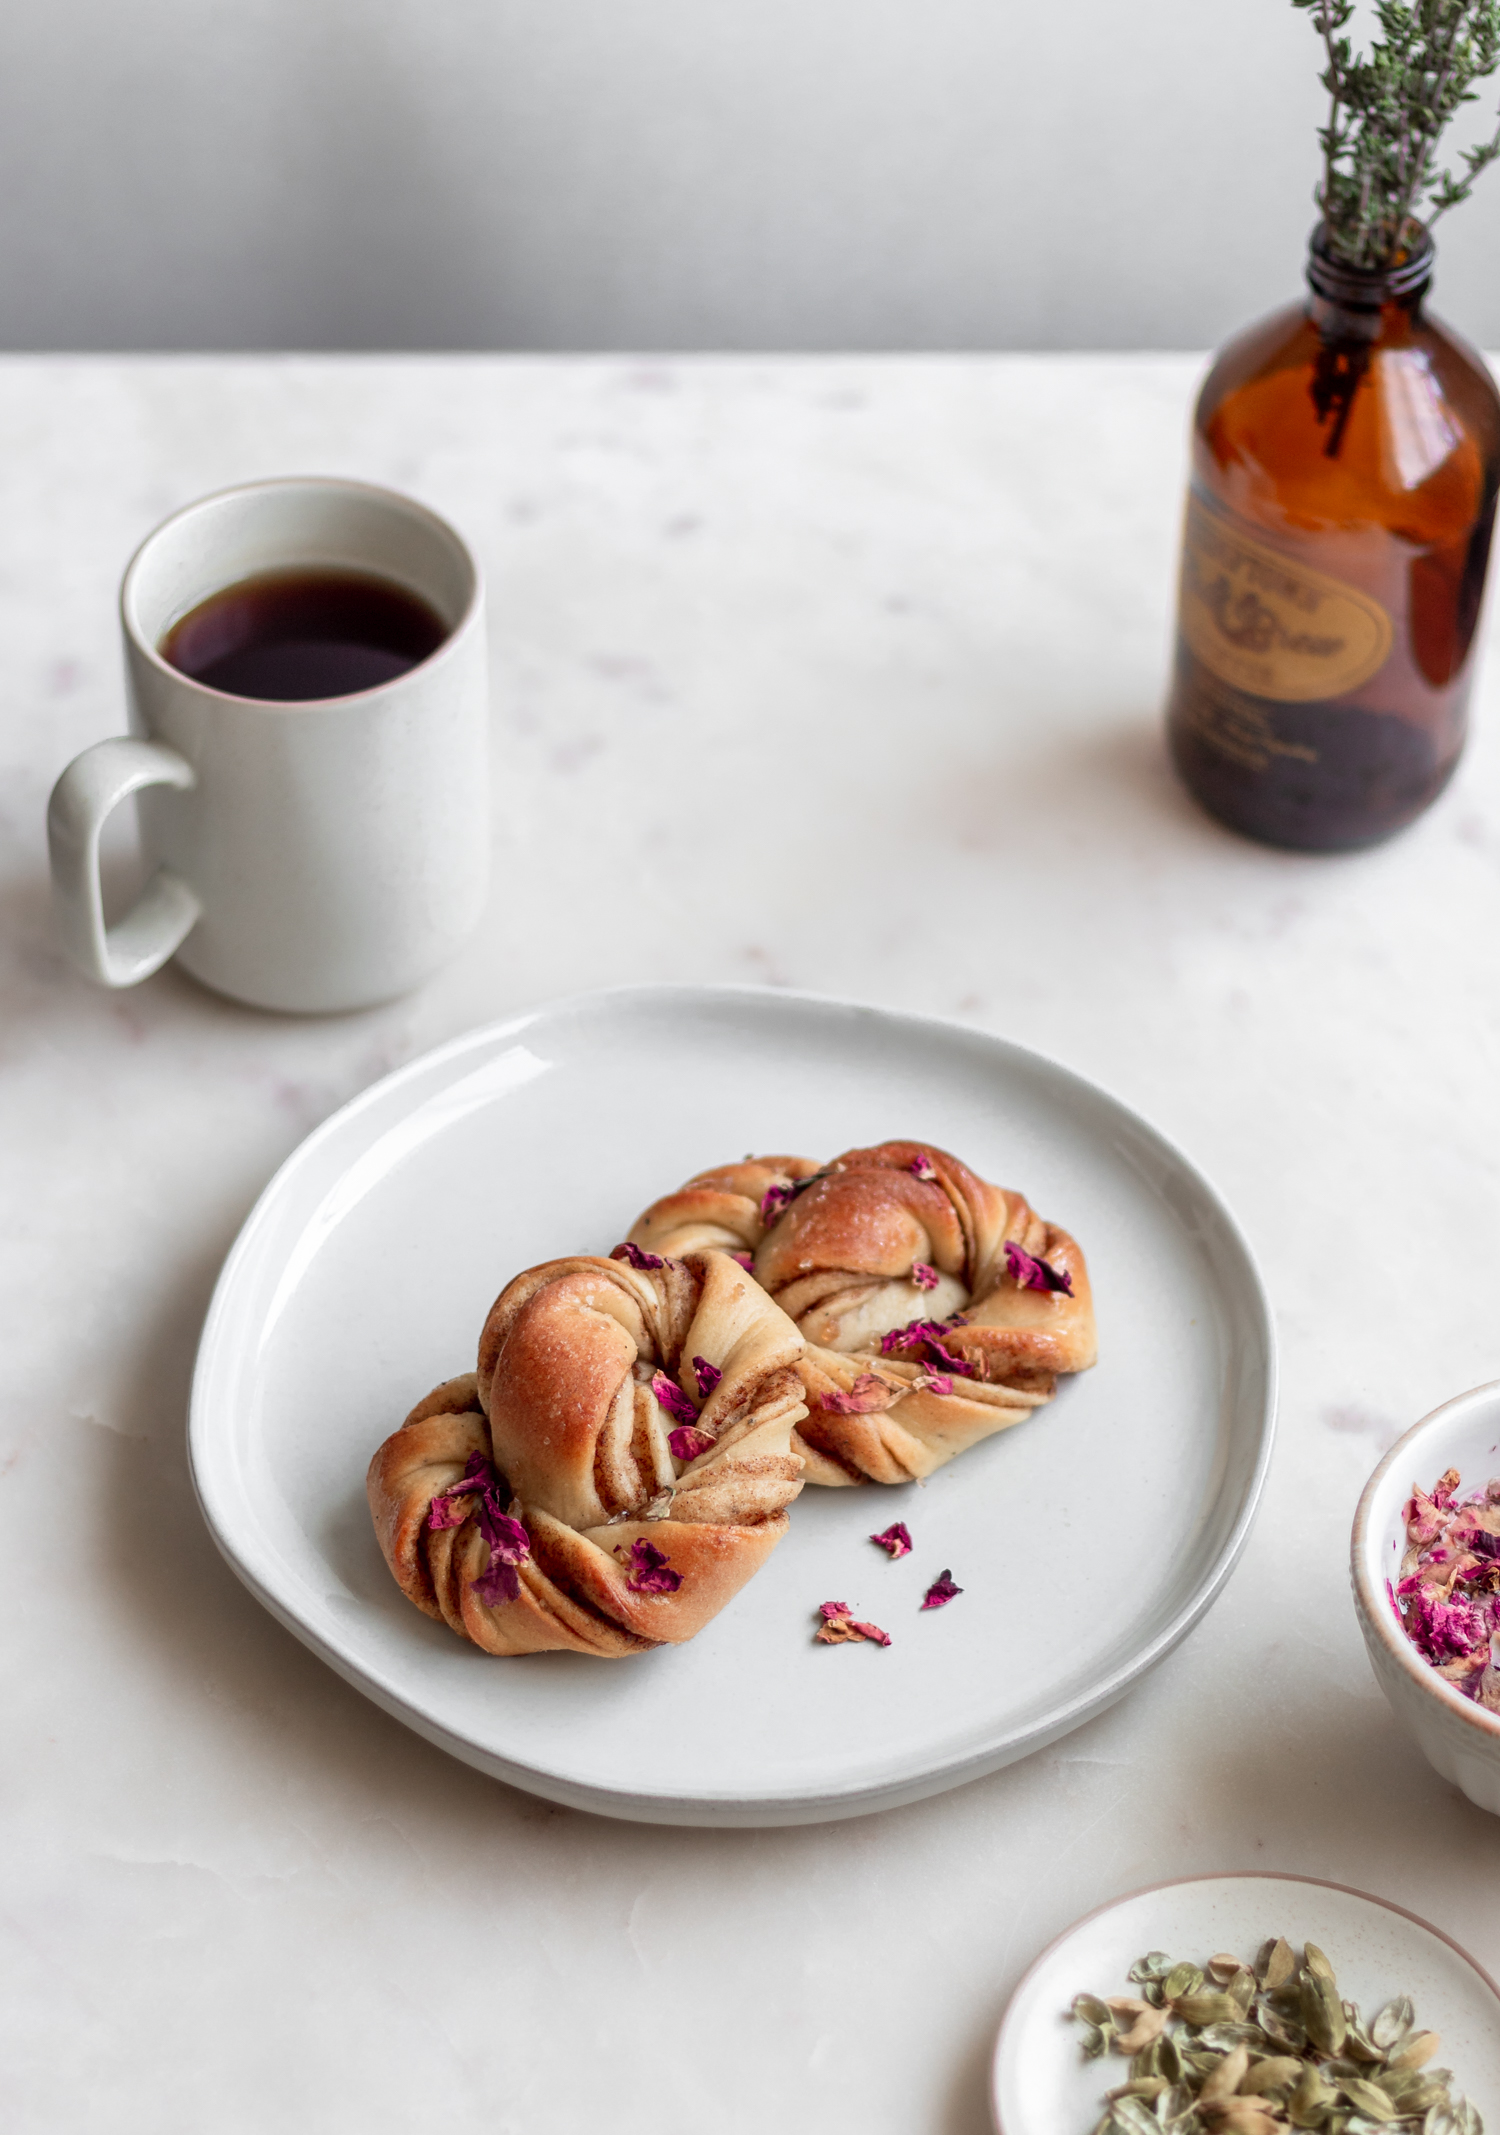 A side image of two Swedish cinnamon rolls with rose petals on a white plate placed on a white counter next to a cup of coffee, white bowl of rose petals, and white bowl of cardamom pods.